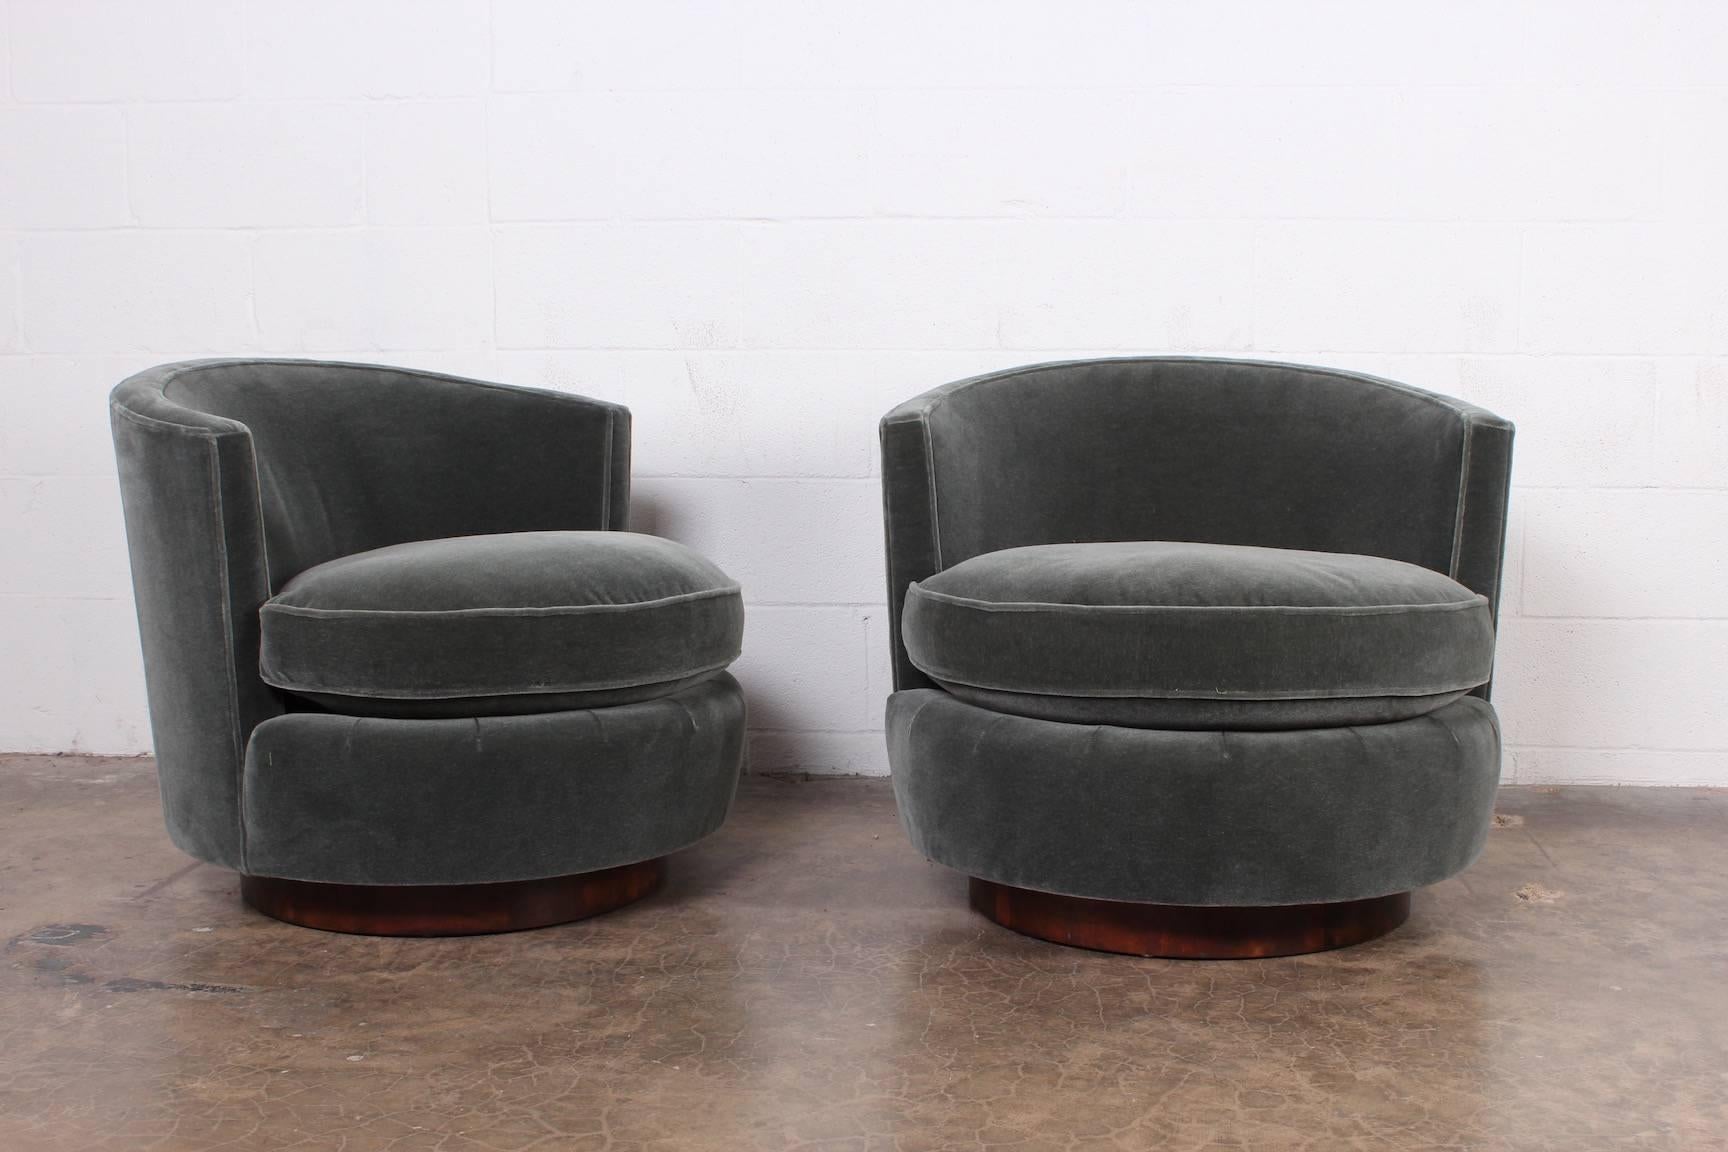 A pair of swivel chairs with walnut plinth bases. Designed by Edward Wormley for Dunbar. Fully restored and upholstered in mohair with down seat cushions.